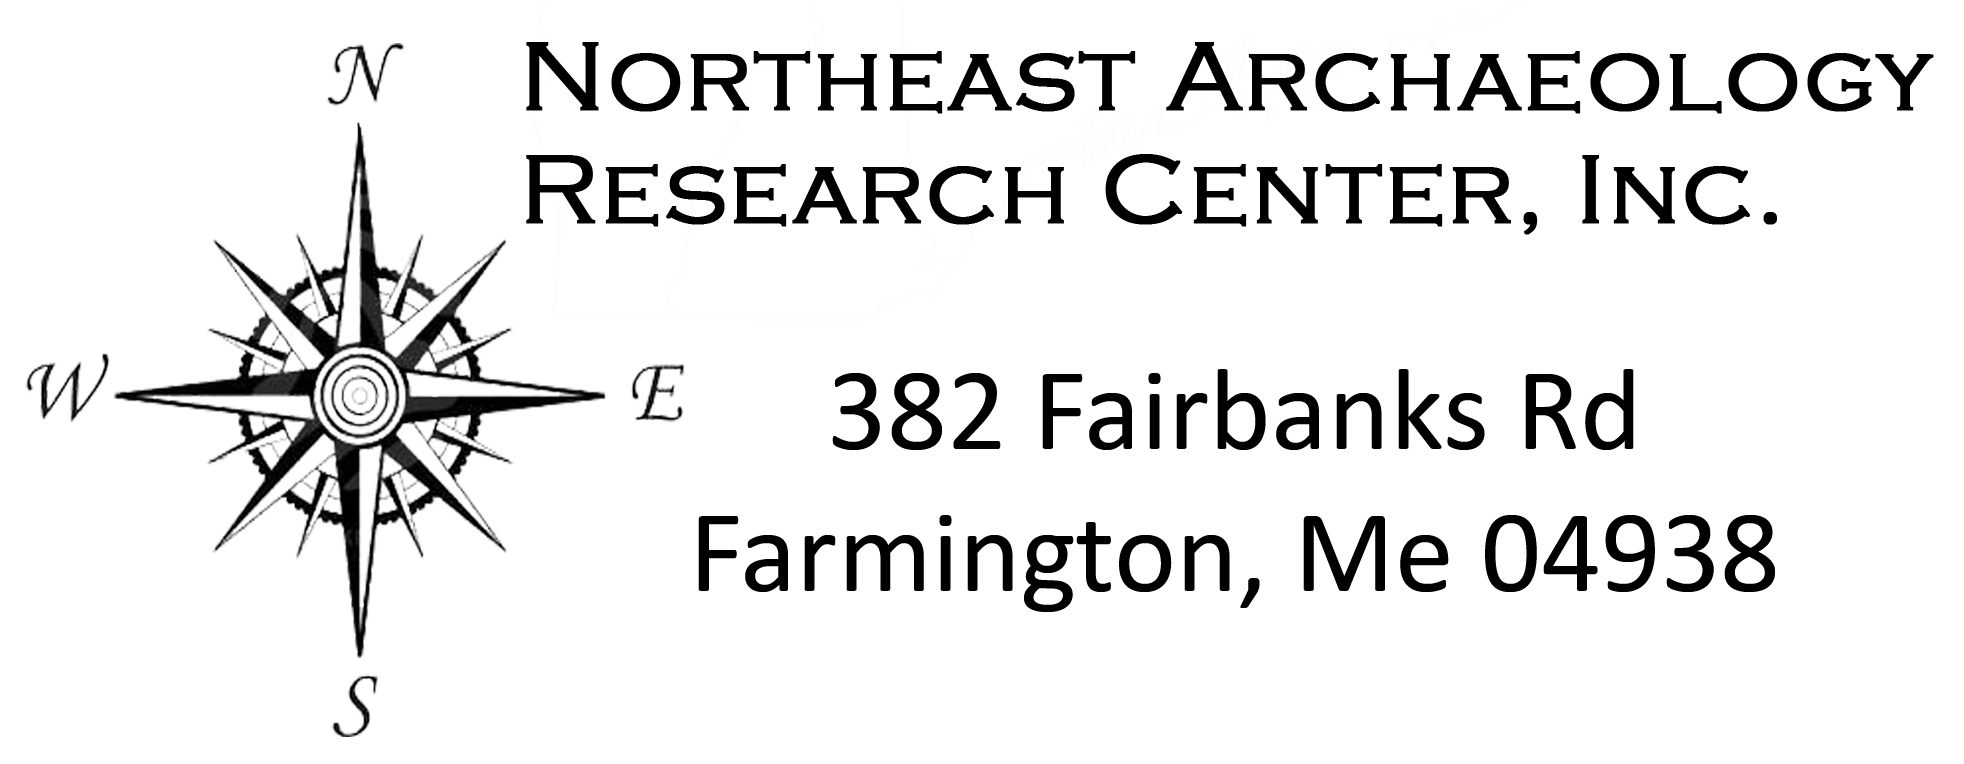 Northeast Archaeology Research Center